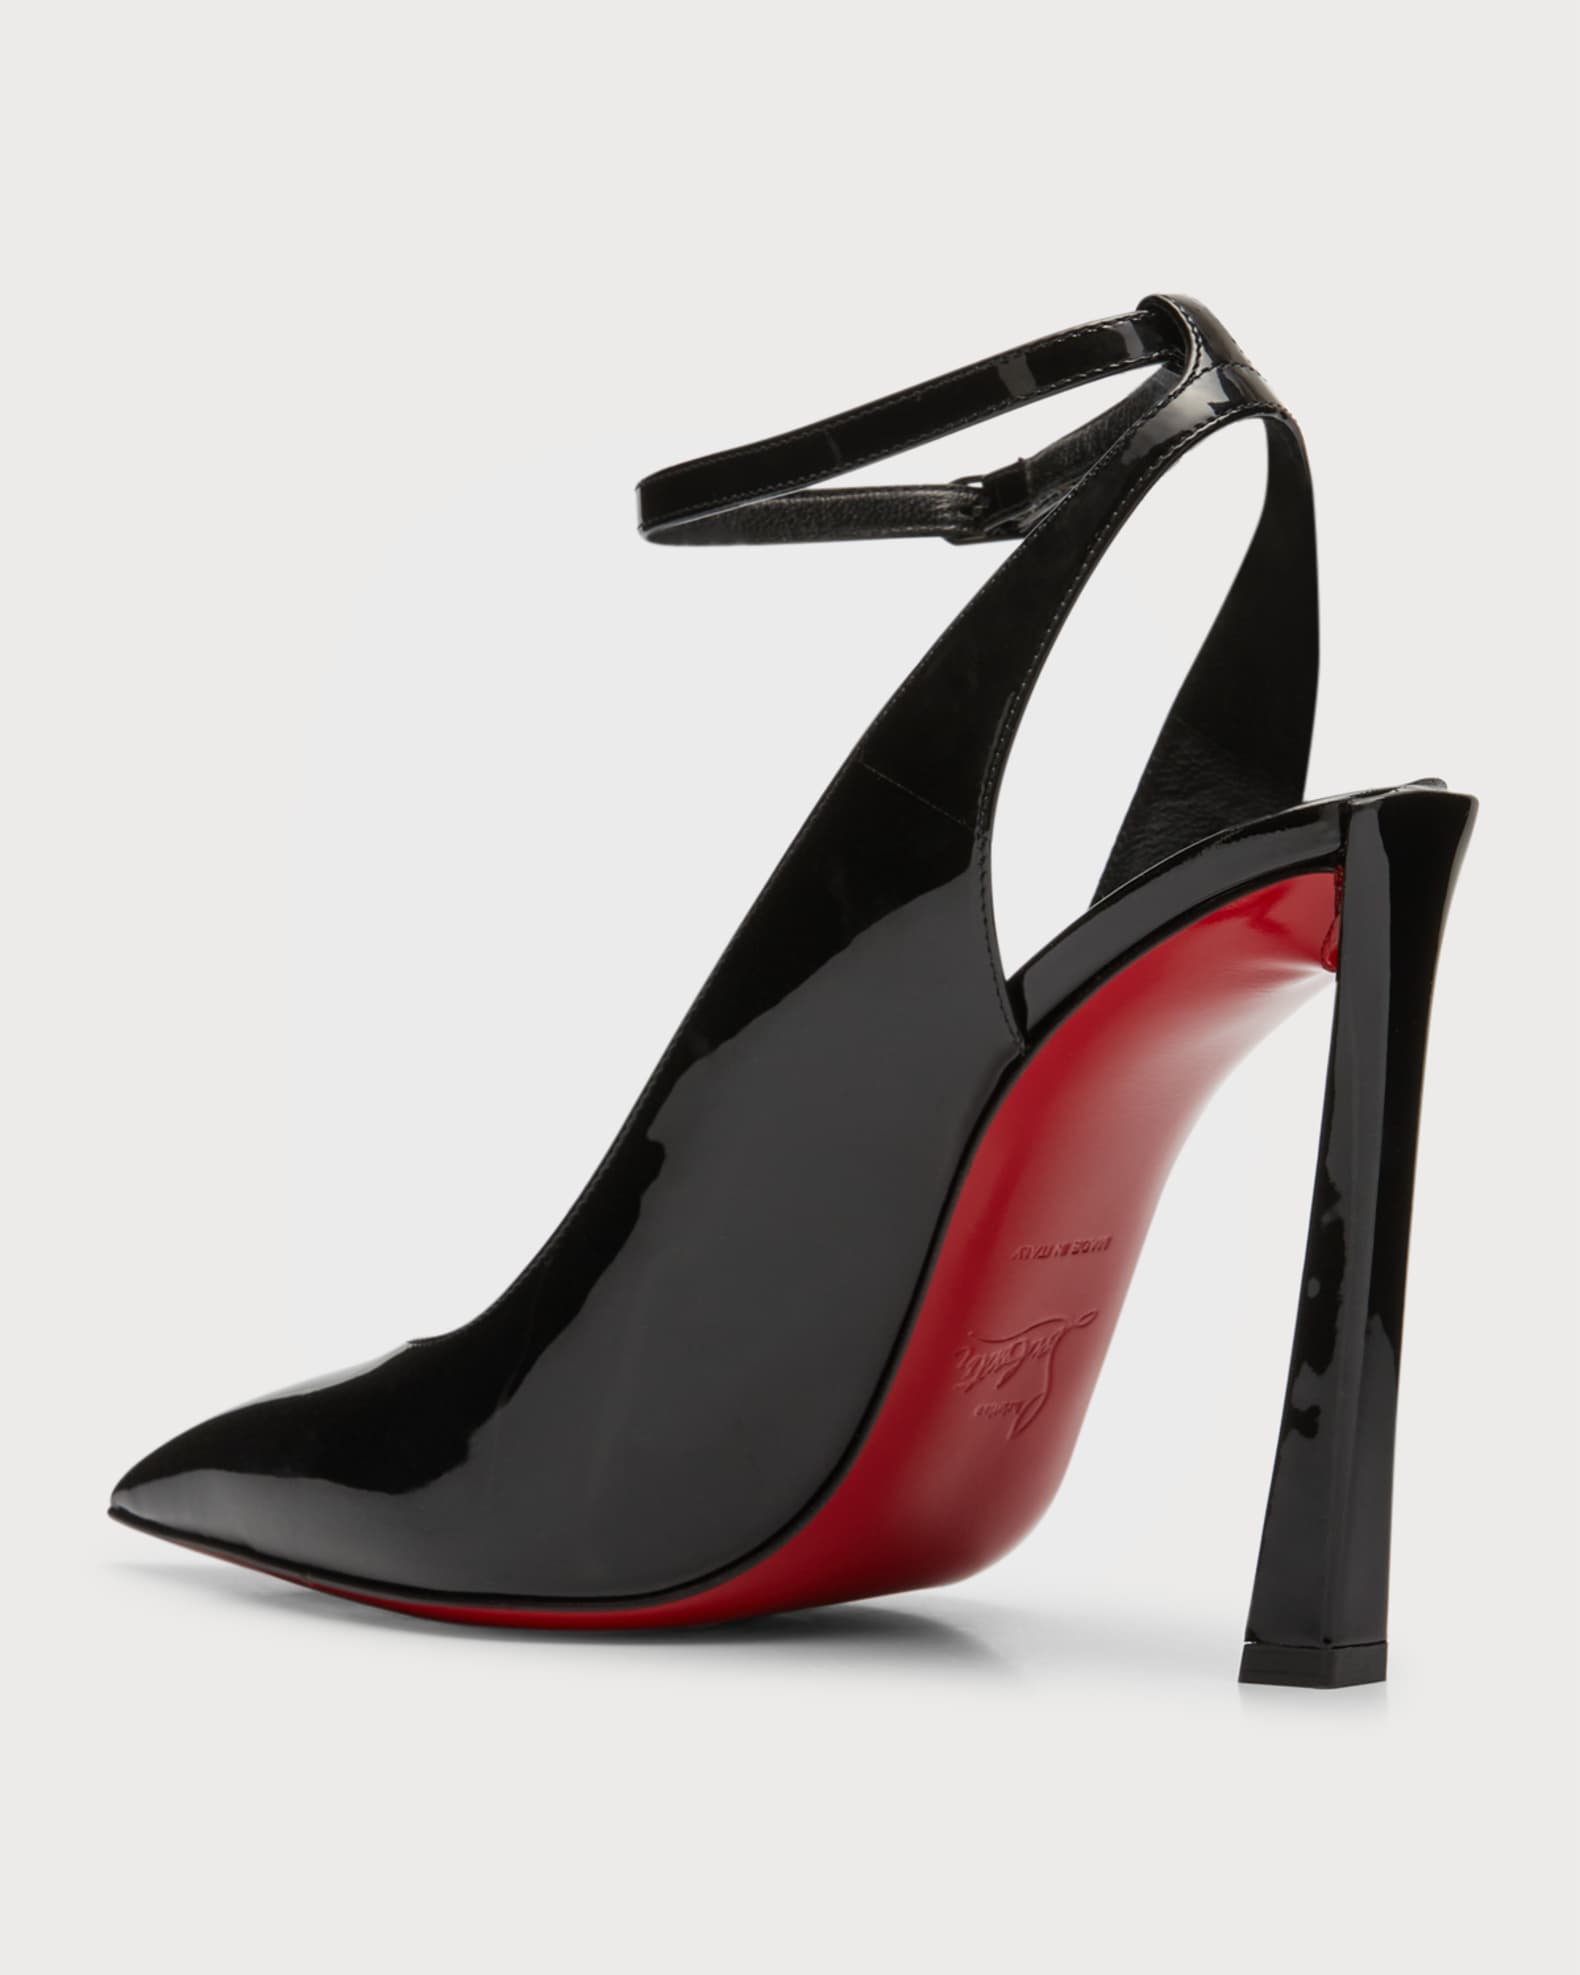 Christian Louboutin Condora Ankle-Strap Red Sole Pumps | Neiman Marcus